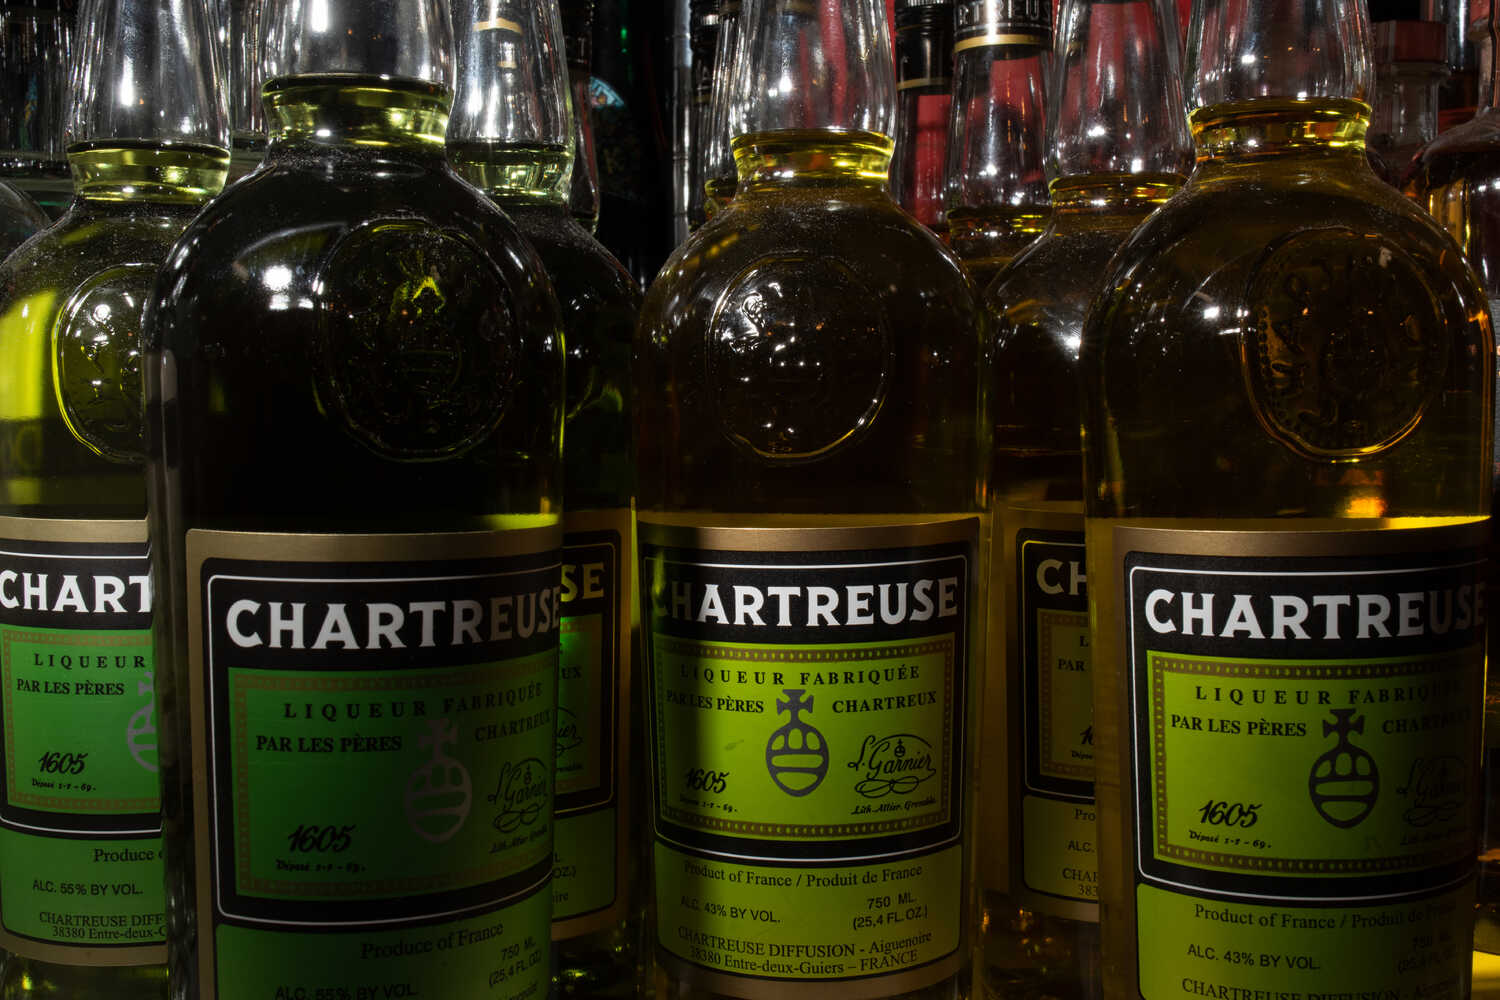 According to lore, the formula for Chartreuse is based on a recipe that was entrusted to the Carthusian order of monks in 1605.